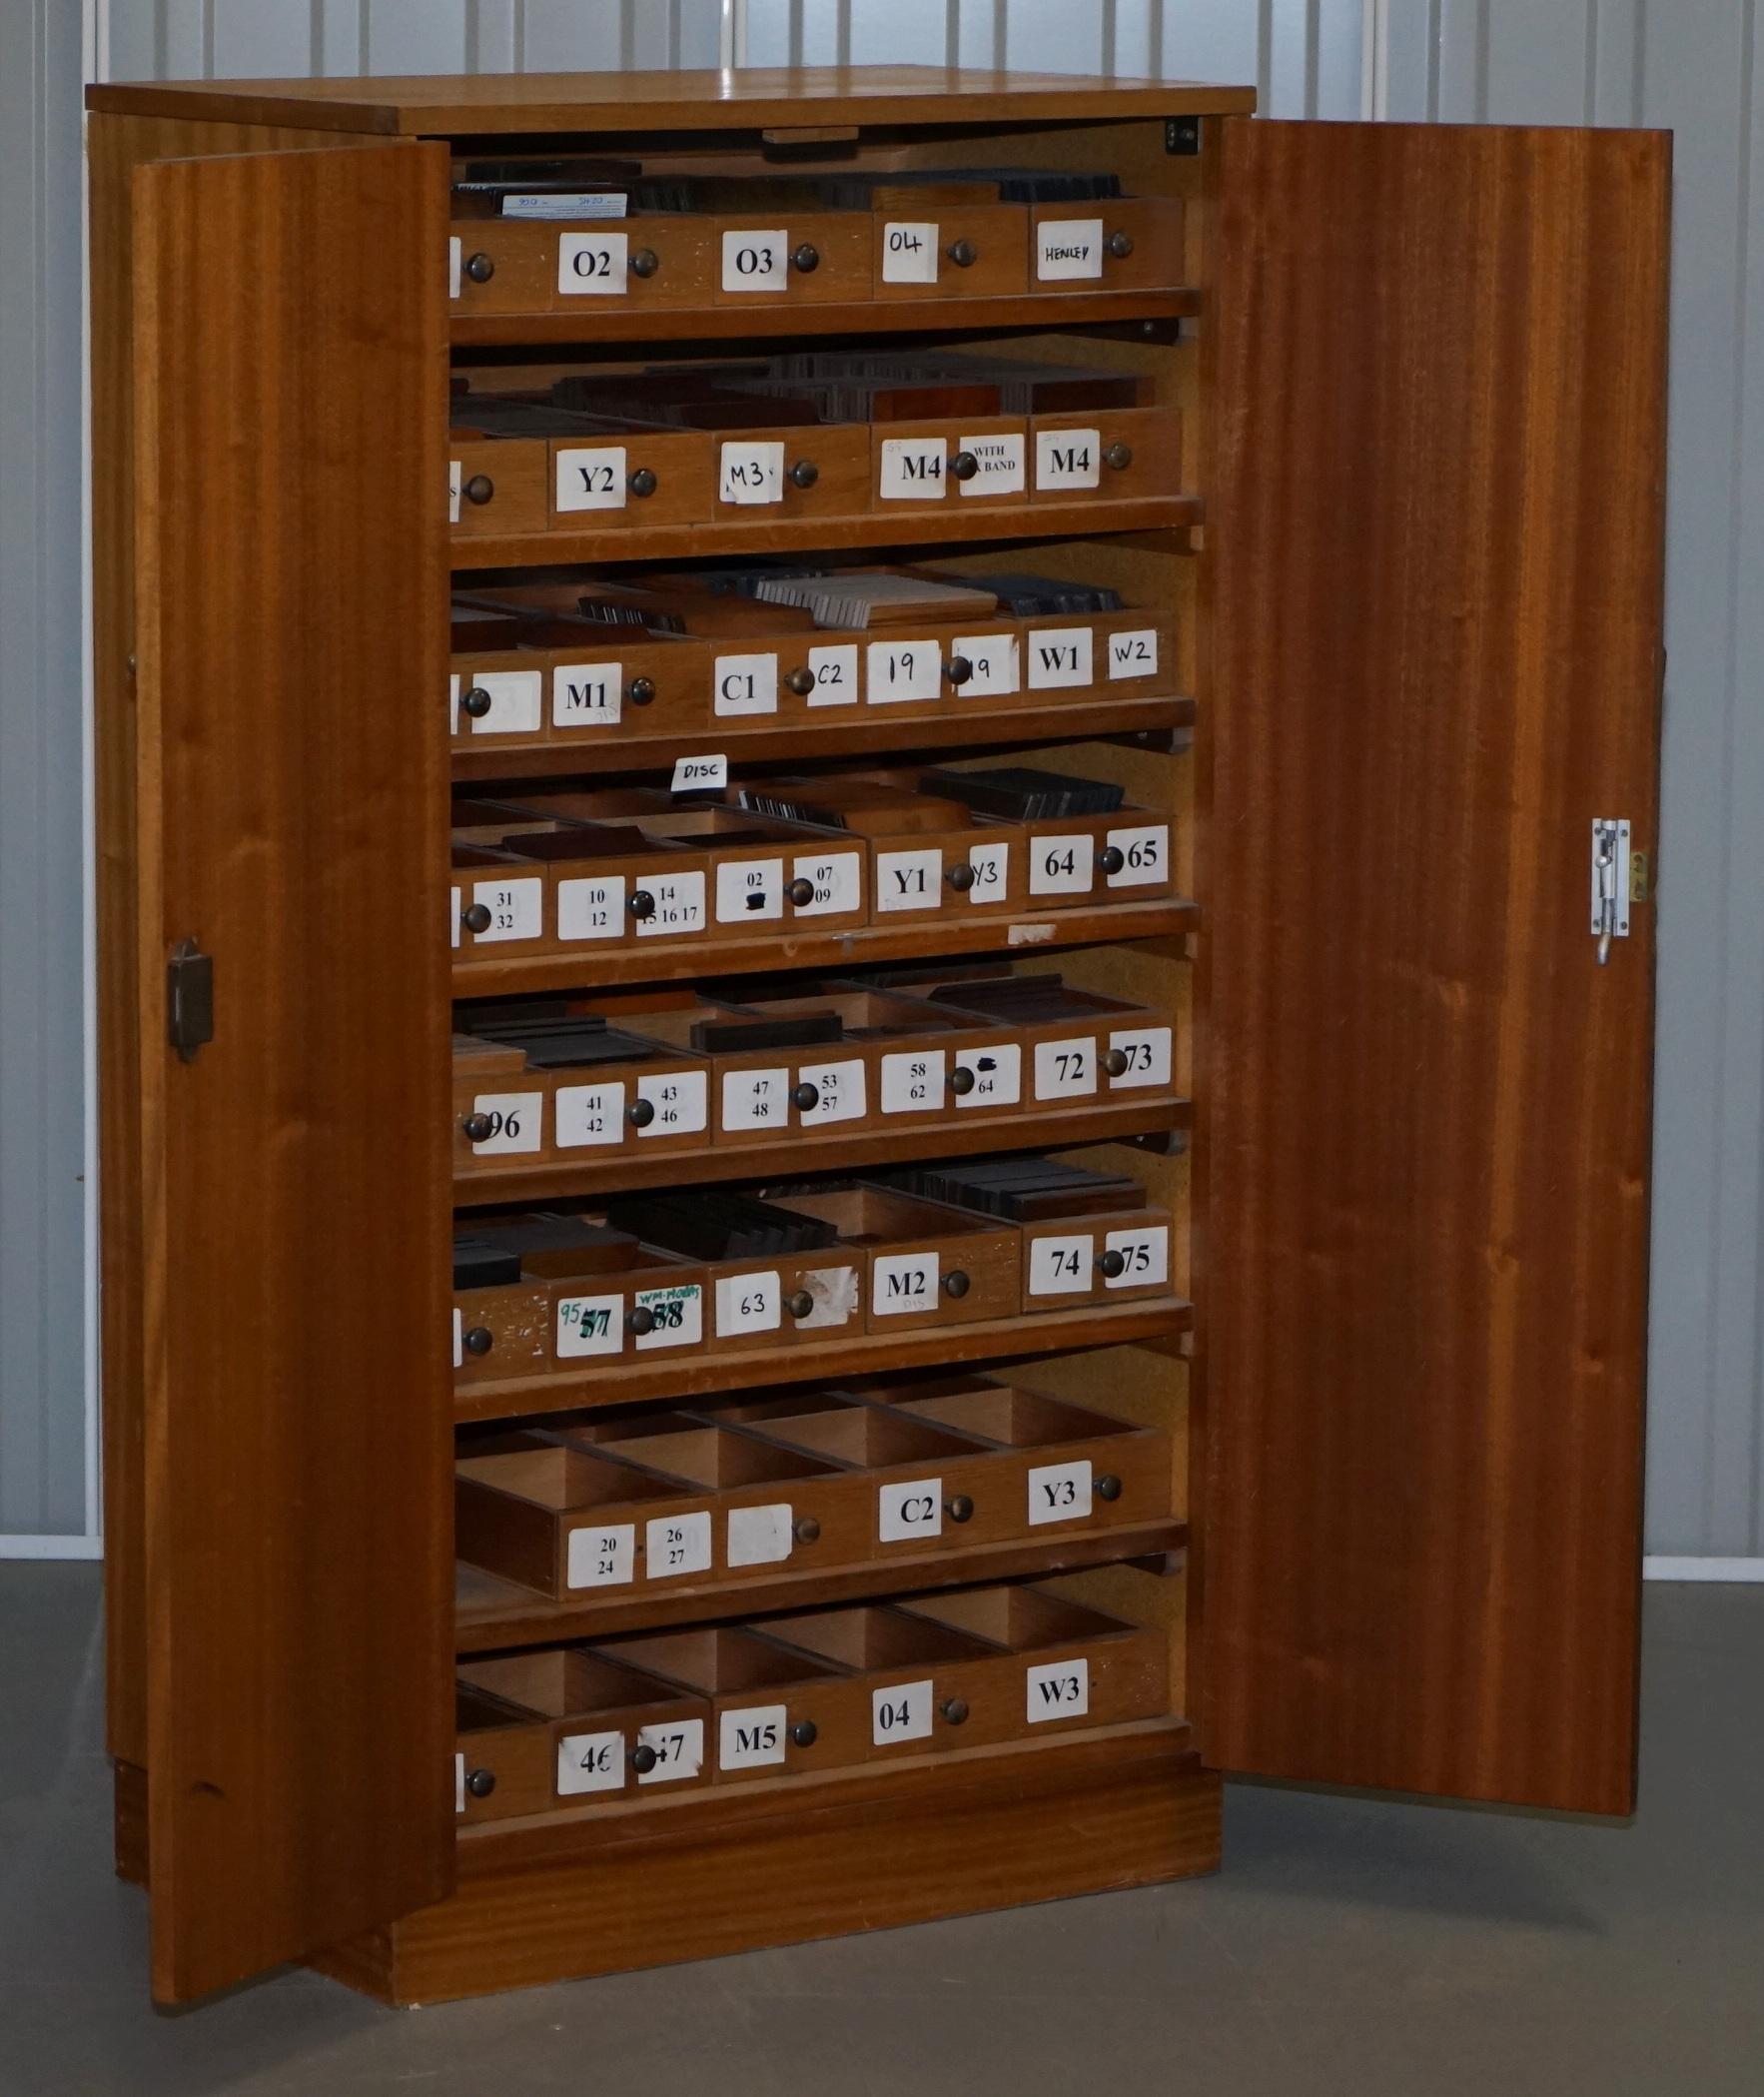 We are delighted to offer for sale this original Vintage wood sample cabinet from Bevan Funnell

This cabinet has hundreds of wood samples in all kinds of woods, Burr walnut, Yew, Mahogany and so on, they were used to send out to customers as